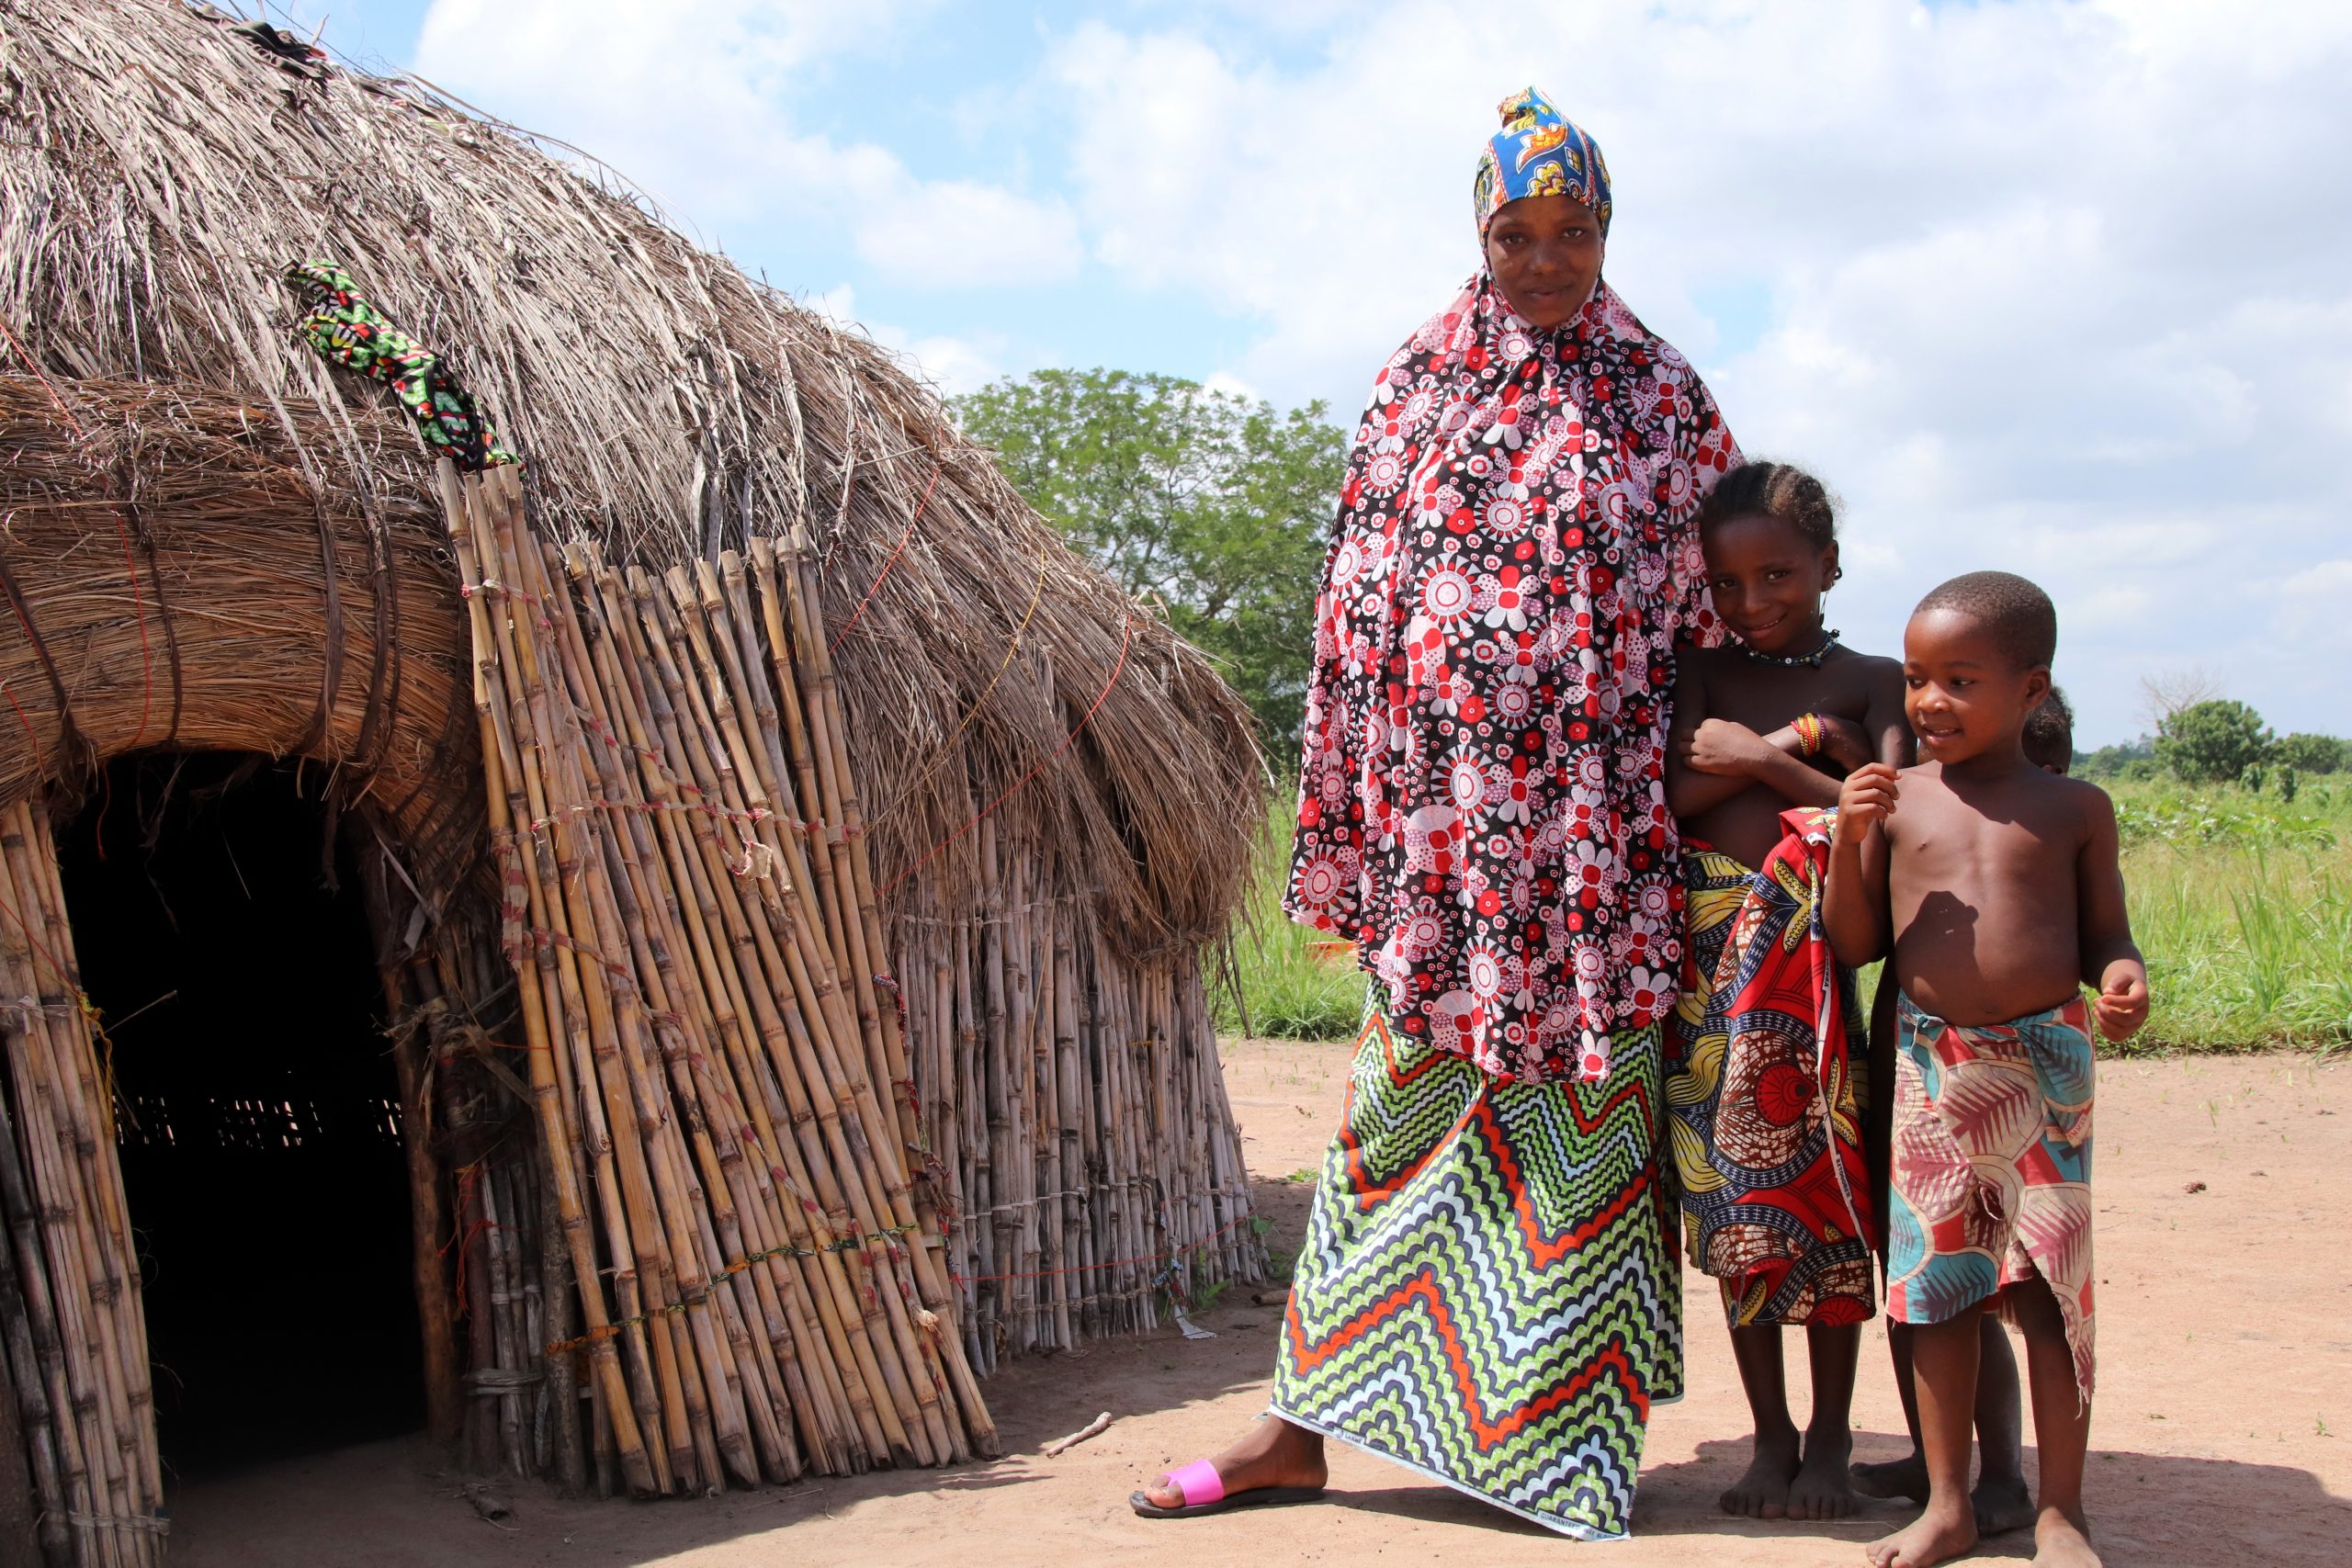 Atakpamé, Togo - June 29, 2019: Mother and her children at her house in a Fulani tribe village close Atakpamé, Togo, West Africa. The Fulani live closely with their animals in their village. The people live in straw huts with thatched roofs.